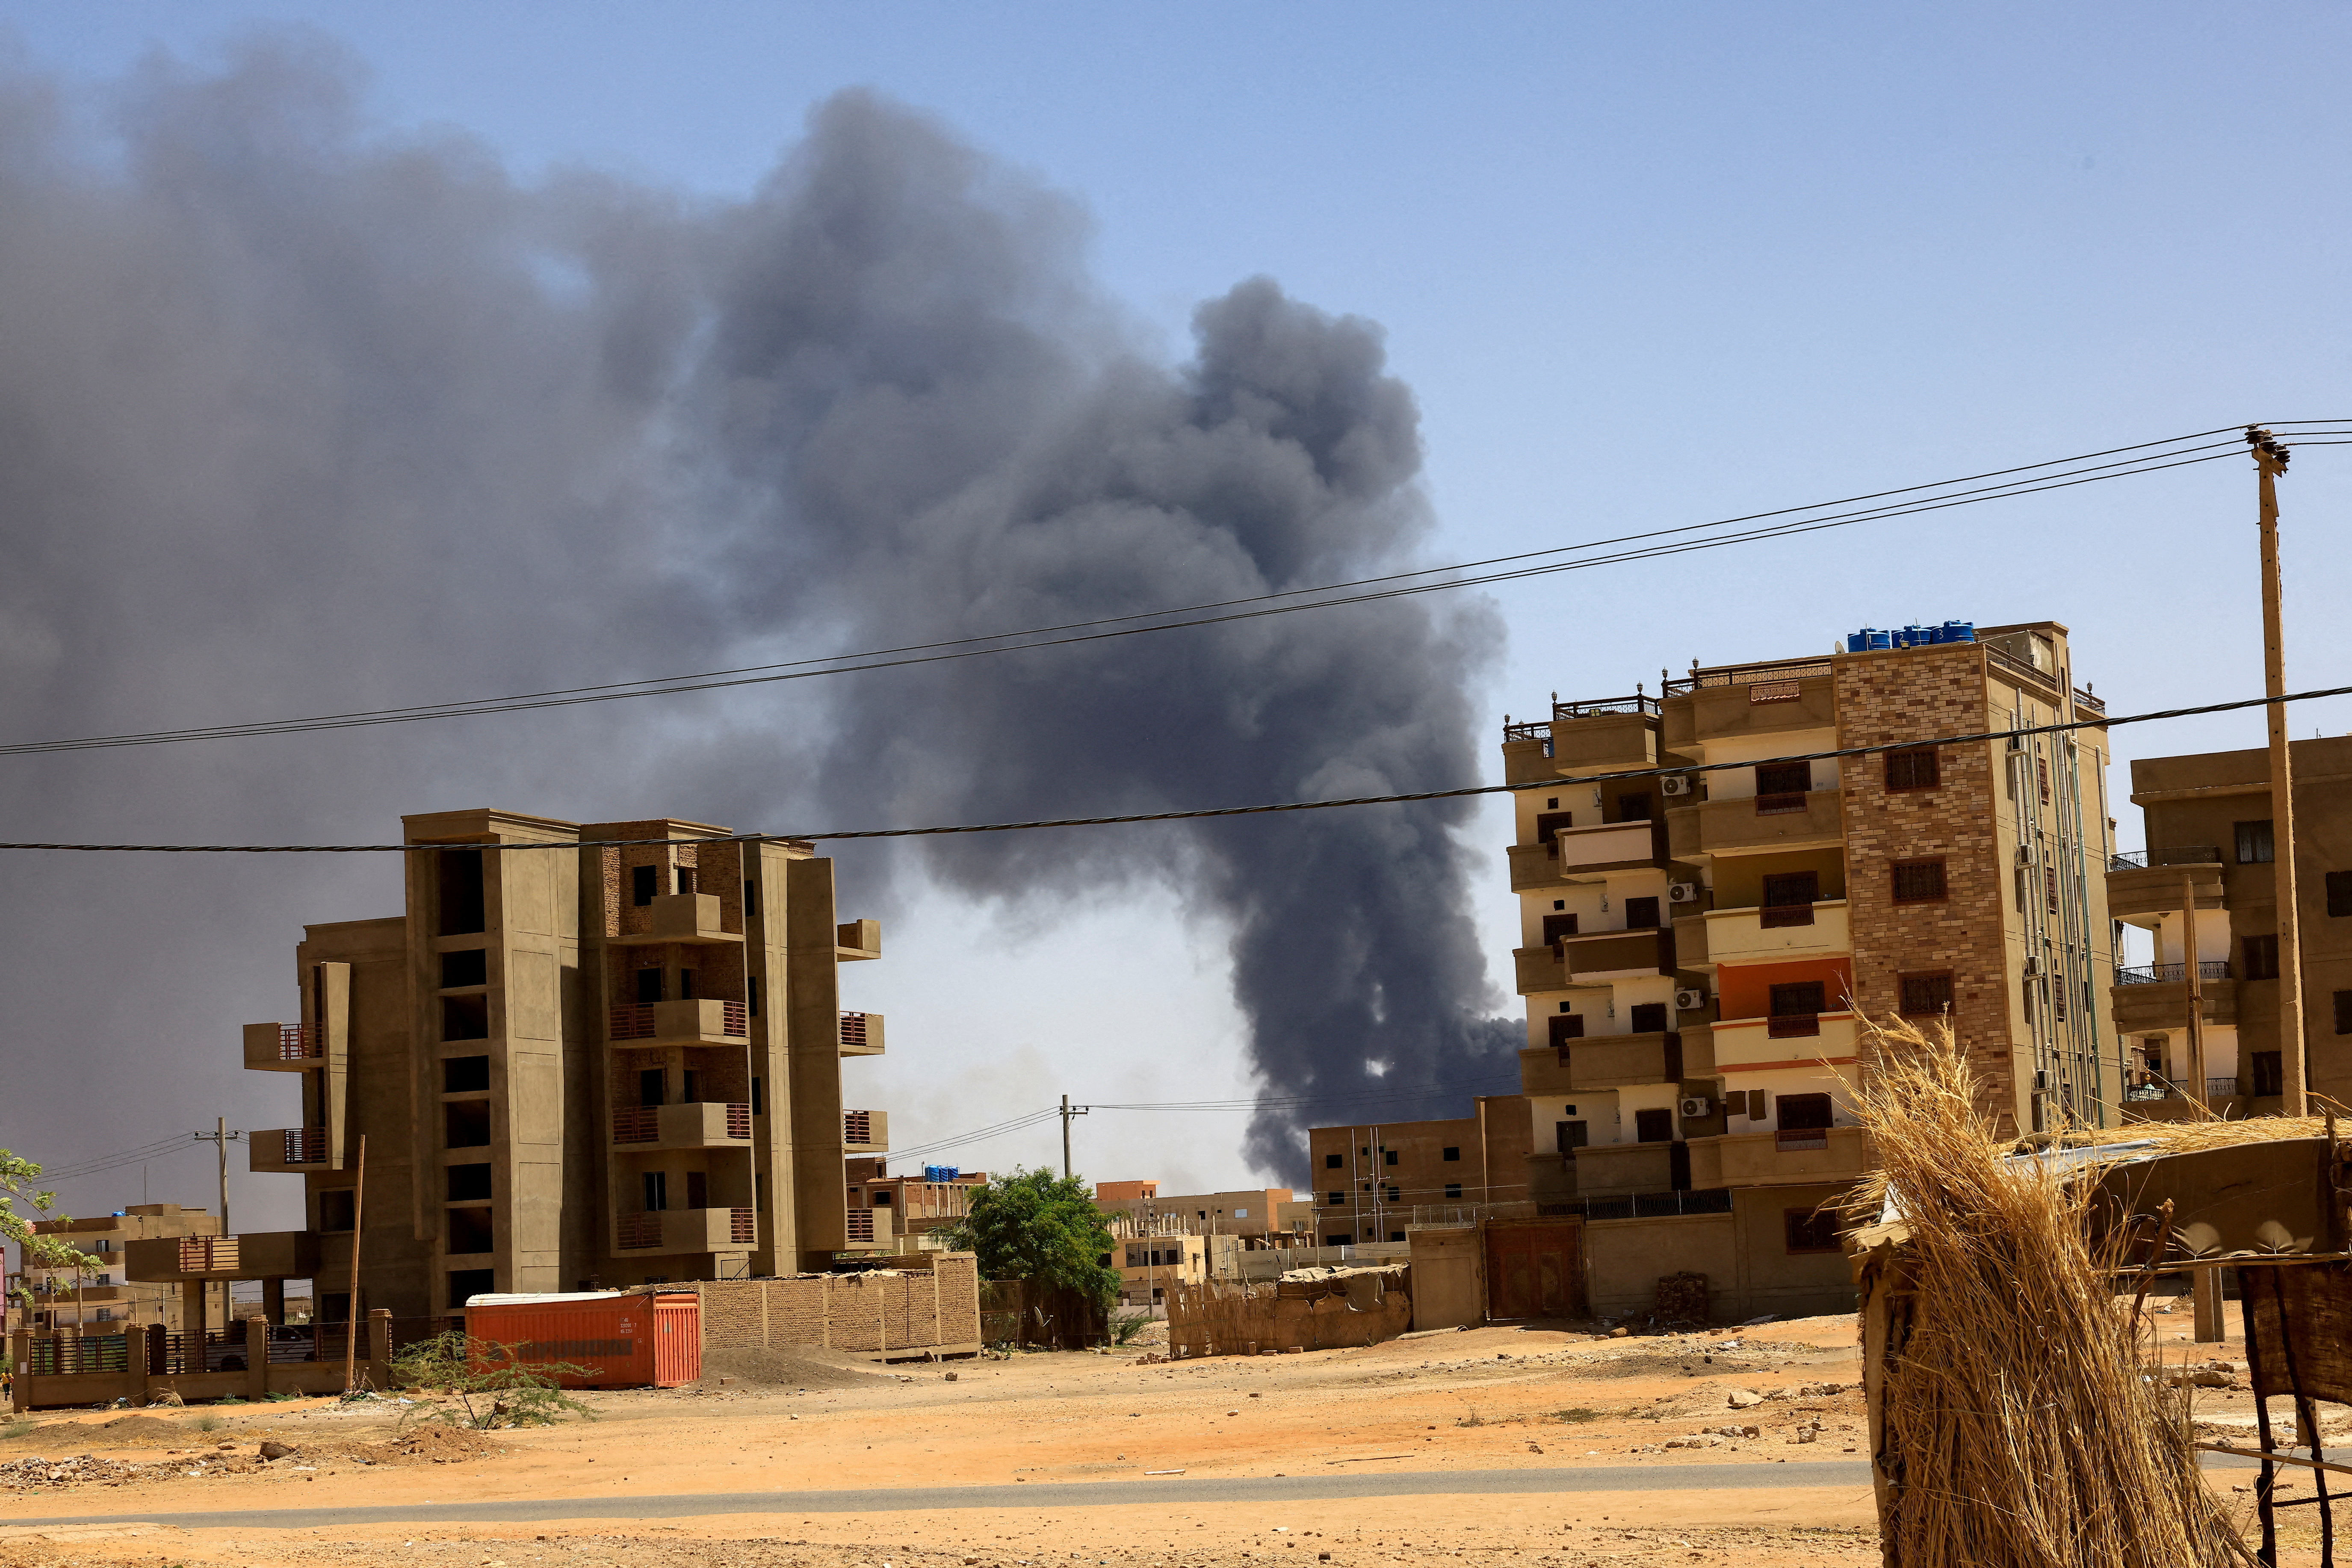 Smoke rises above buildings after air strikes in northern Khartoum